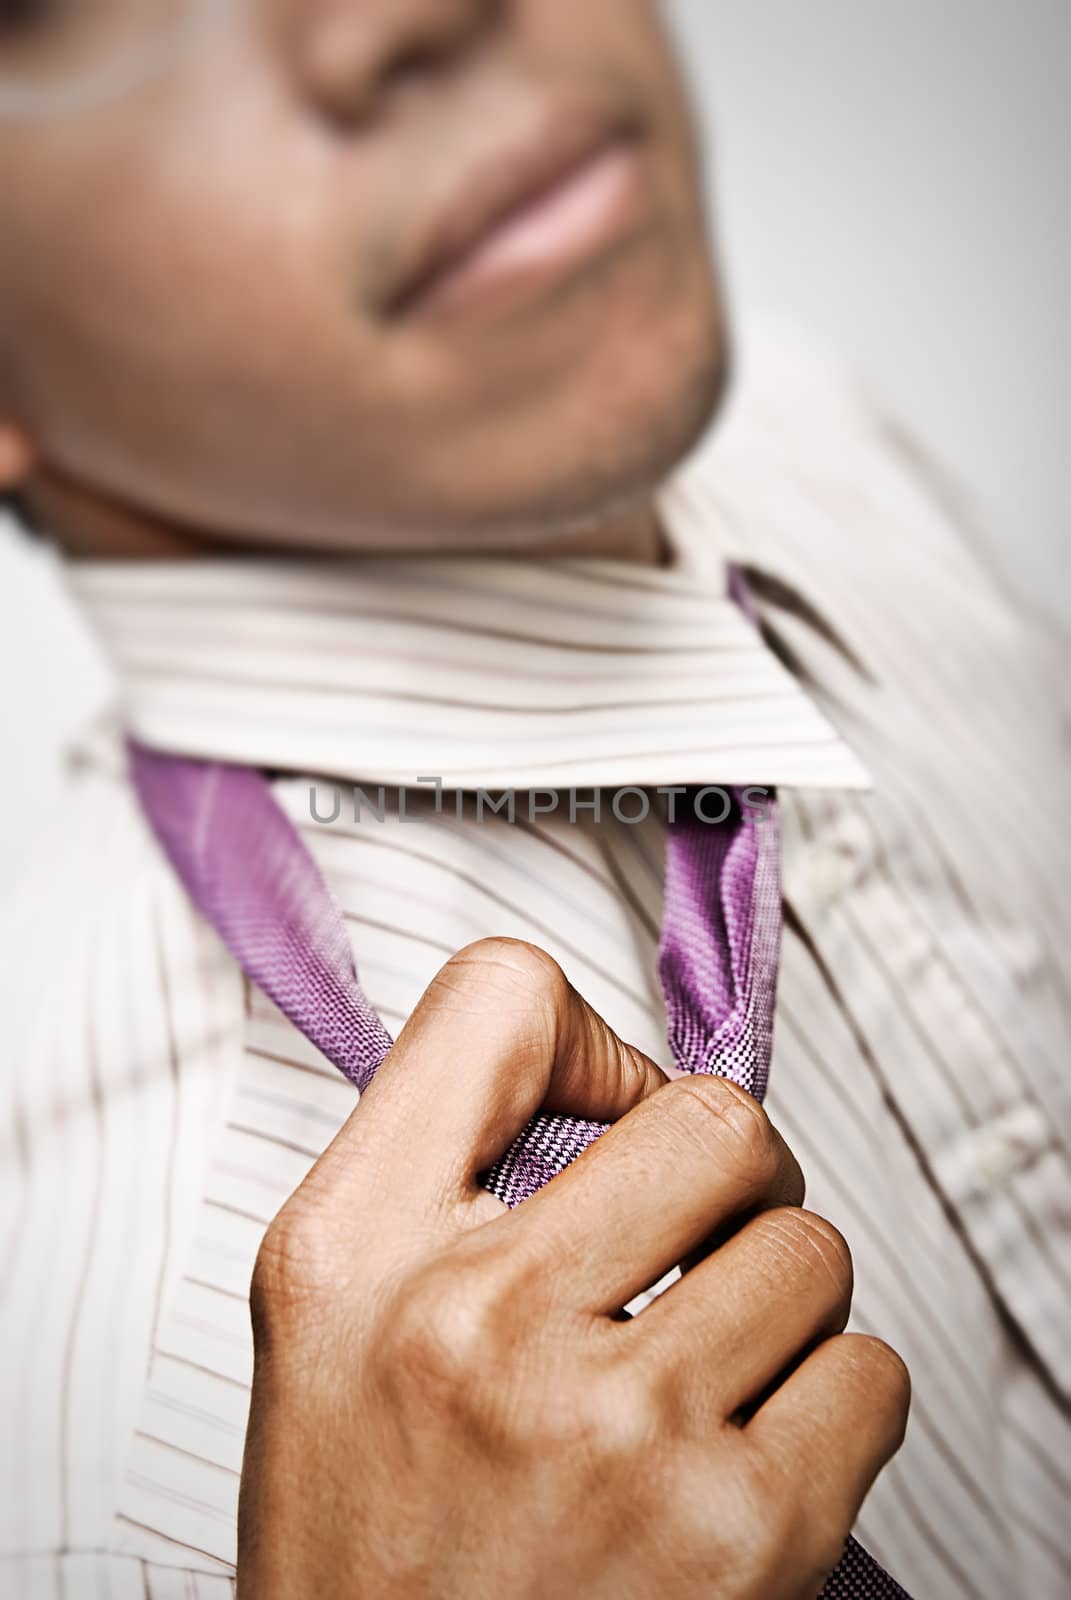 Businessman untie the tie for rest,closeup and focus on tie.